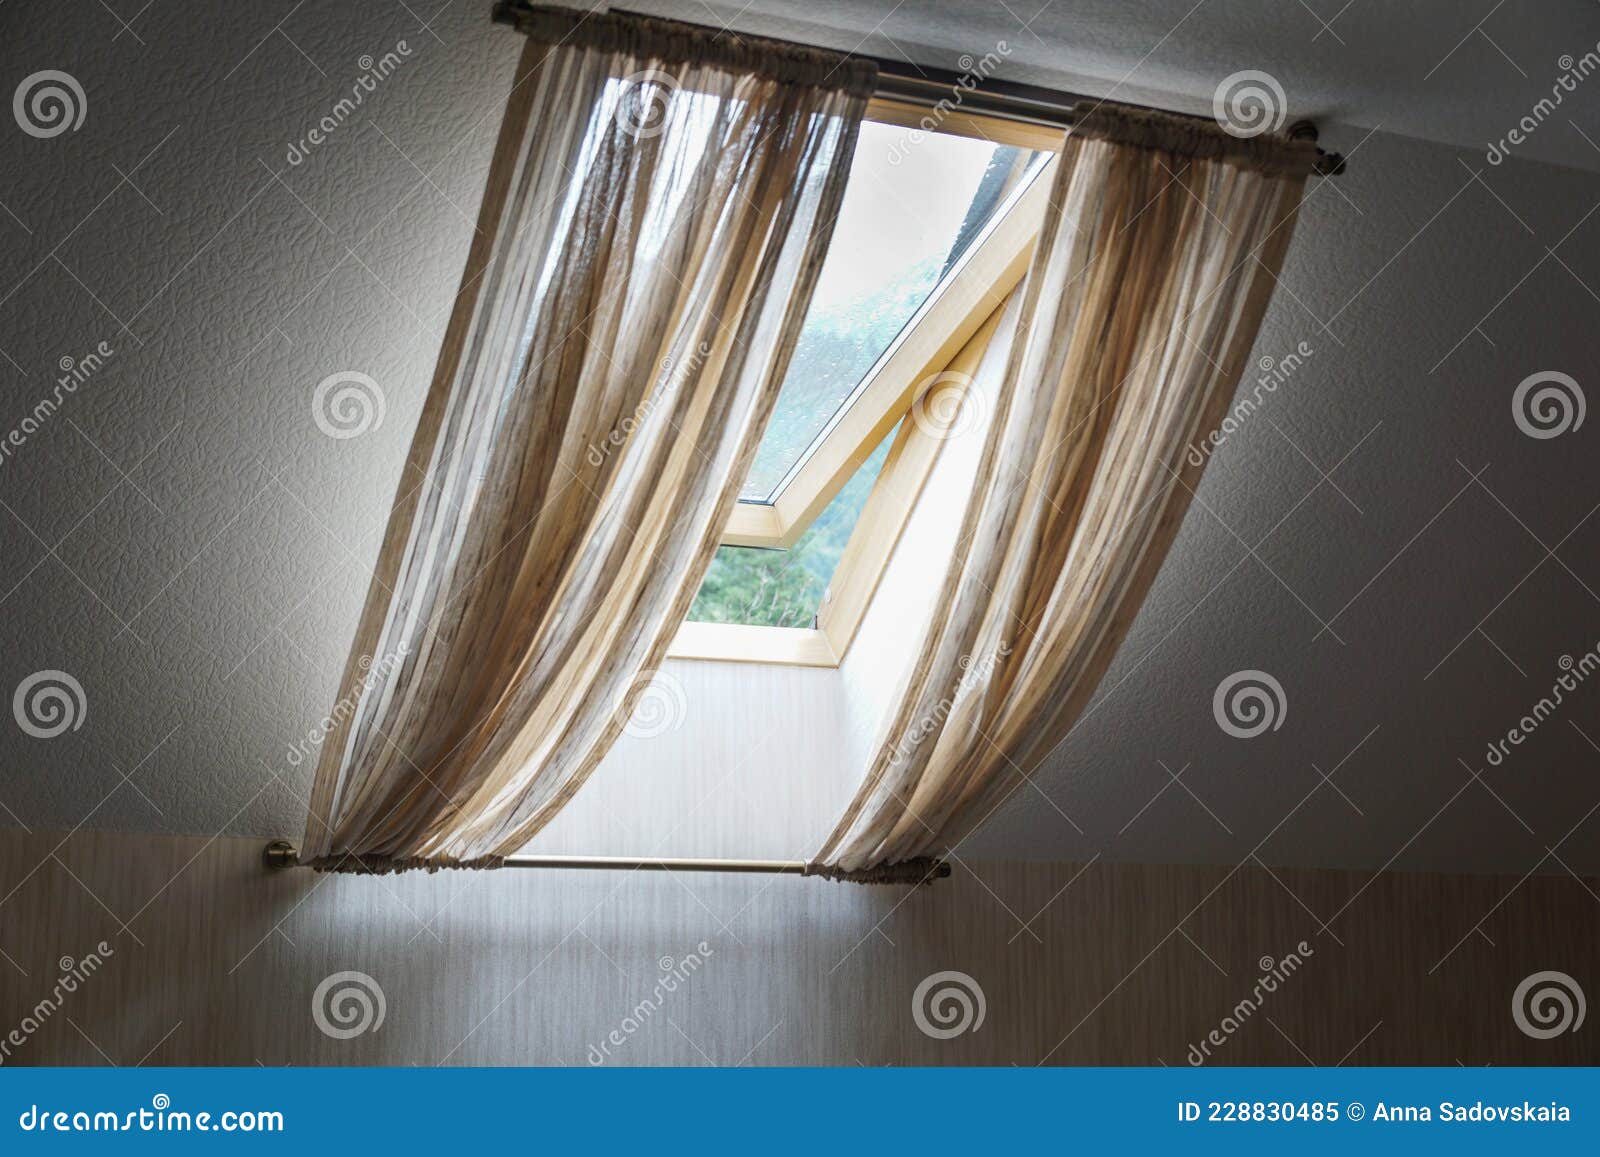 opened rooftop window, view from room, transparent curtains cover window